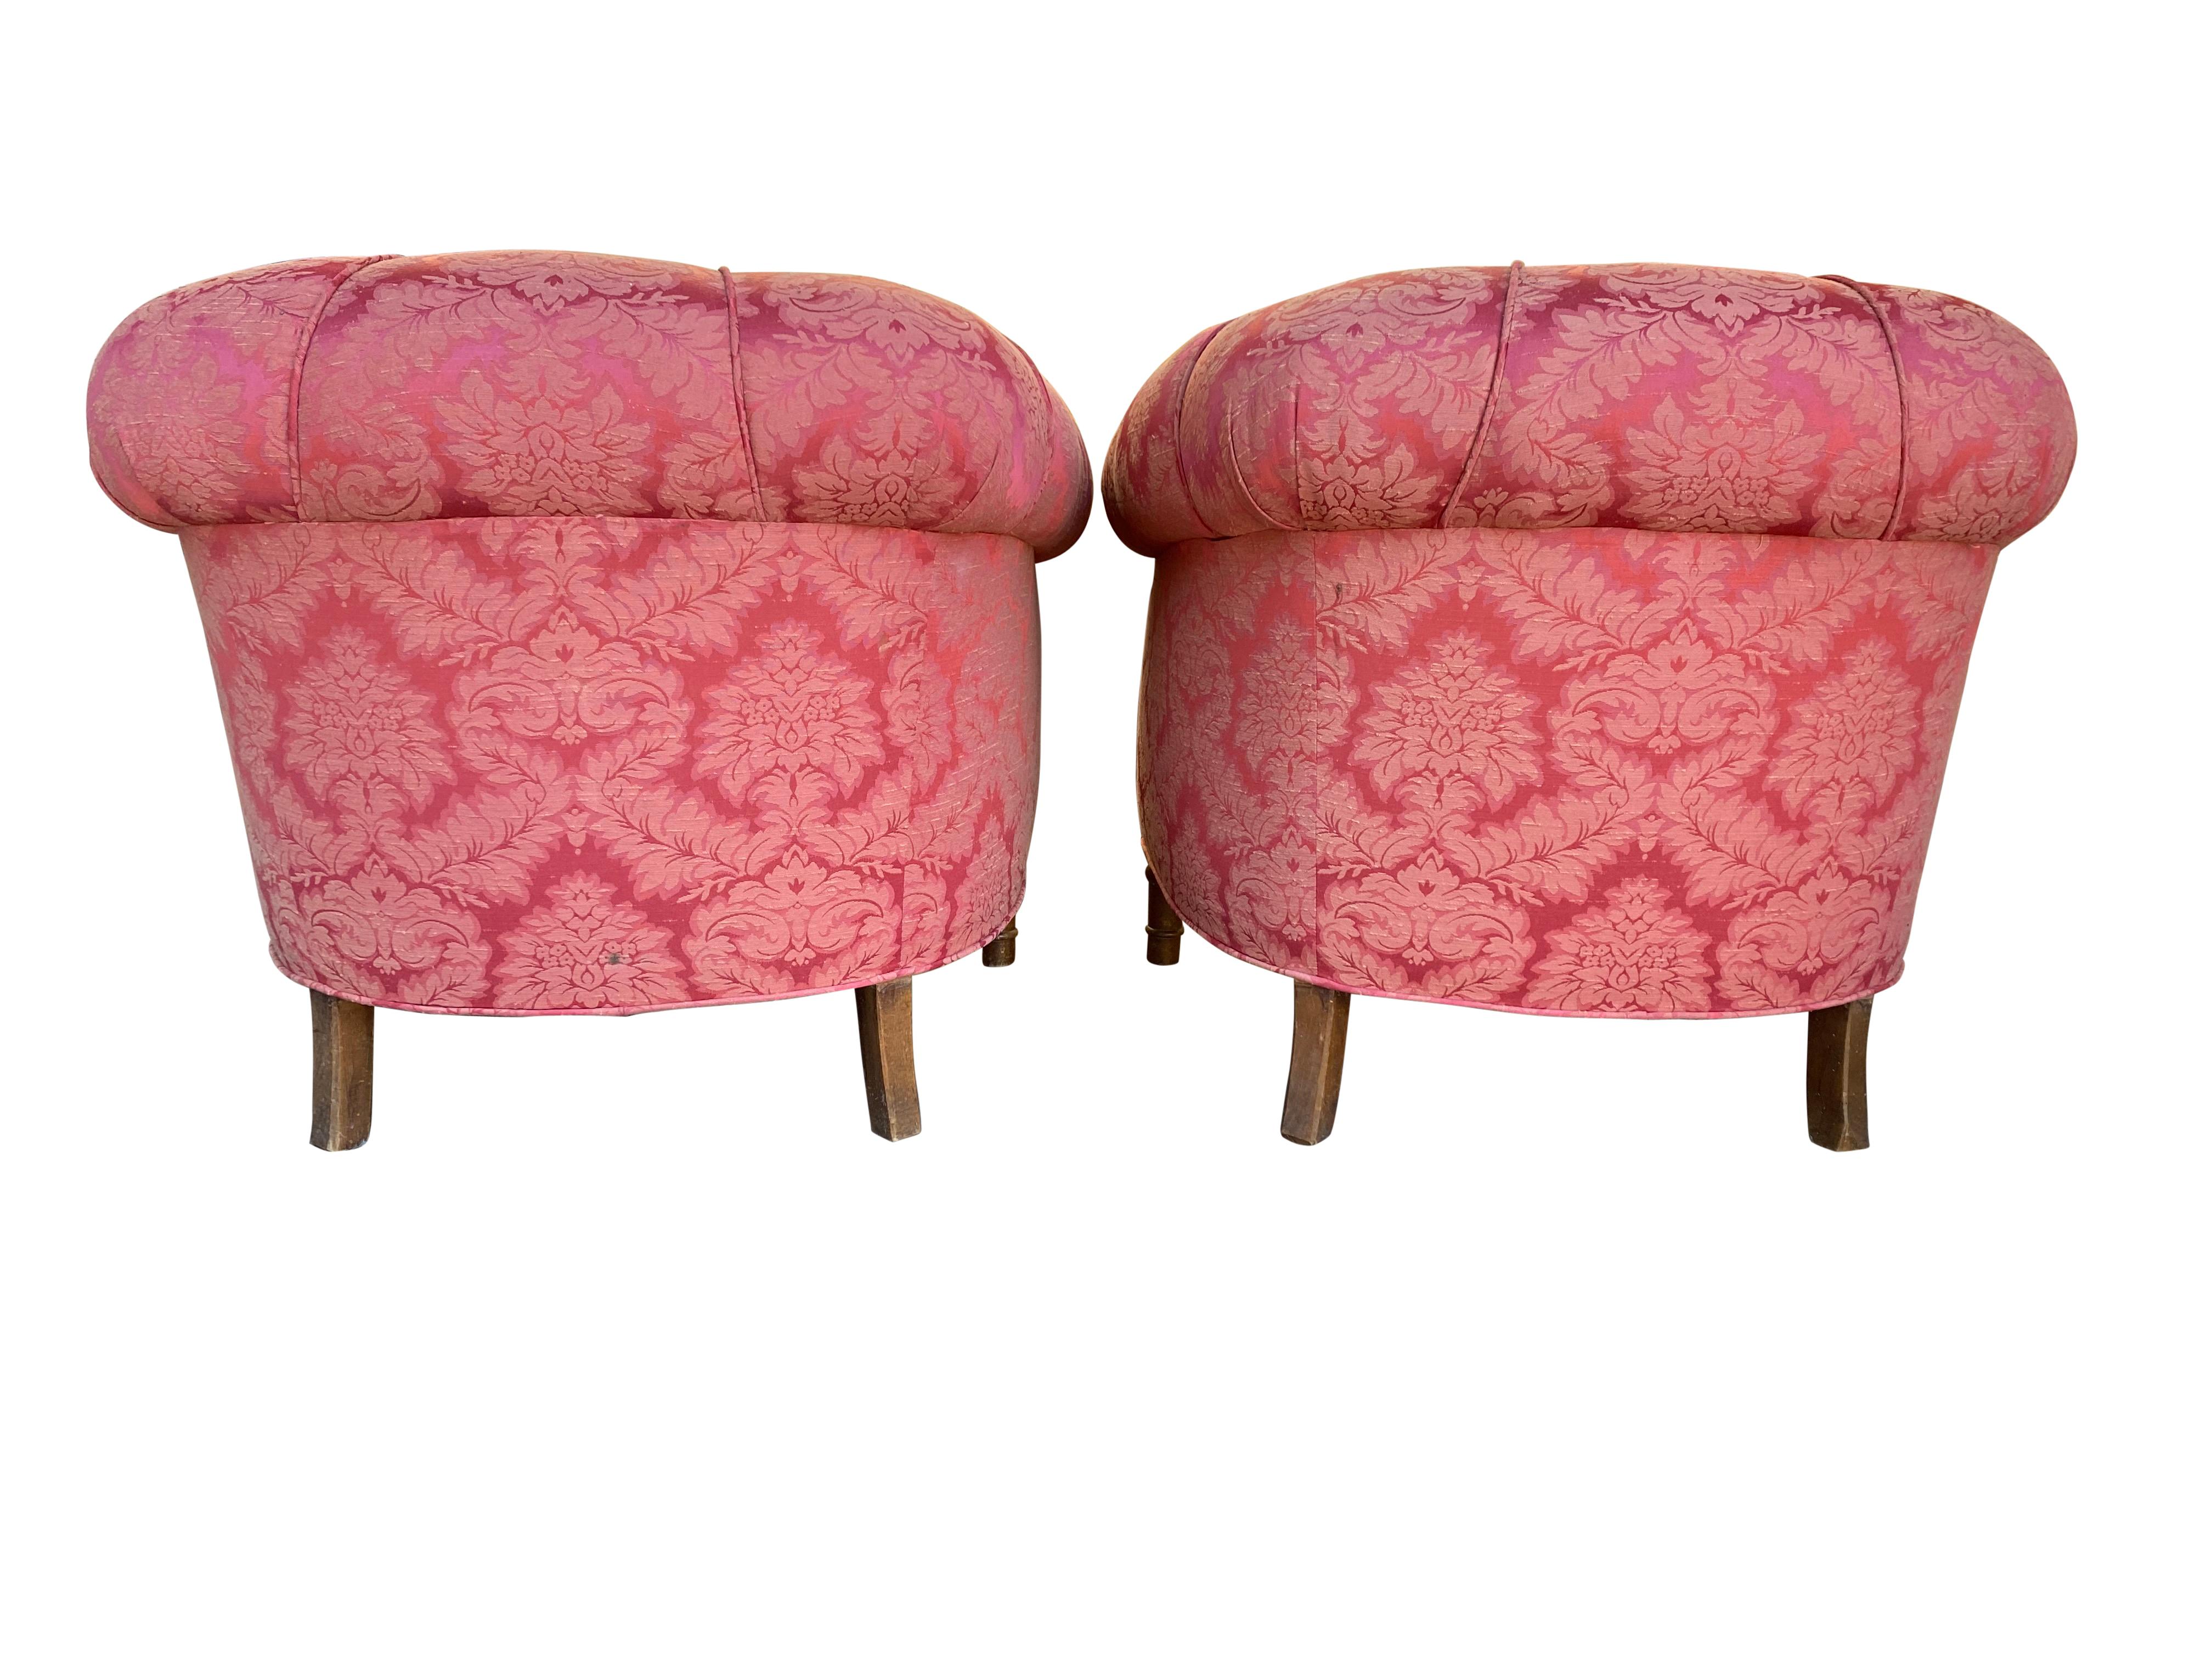 Pair of 1920s Club Chairs in Damask Floral Design For Sale 2